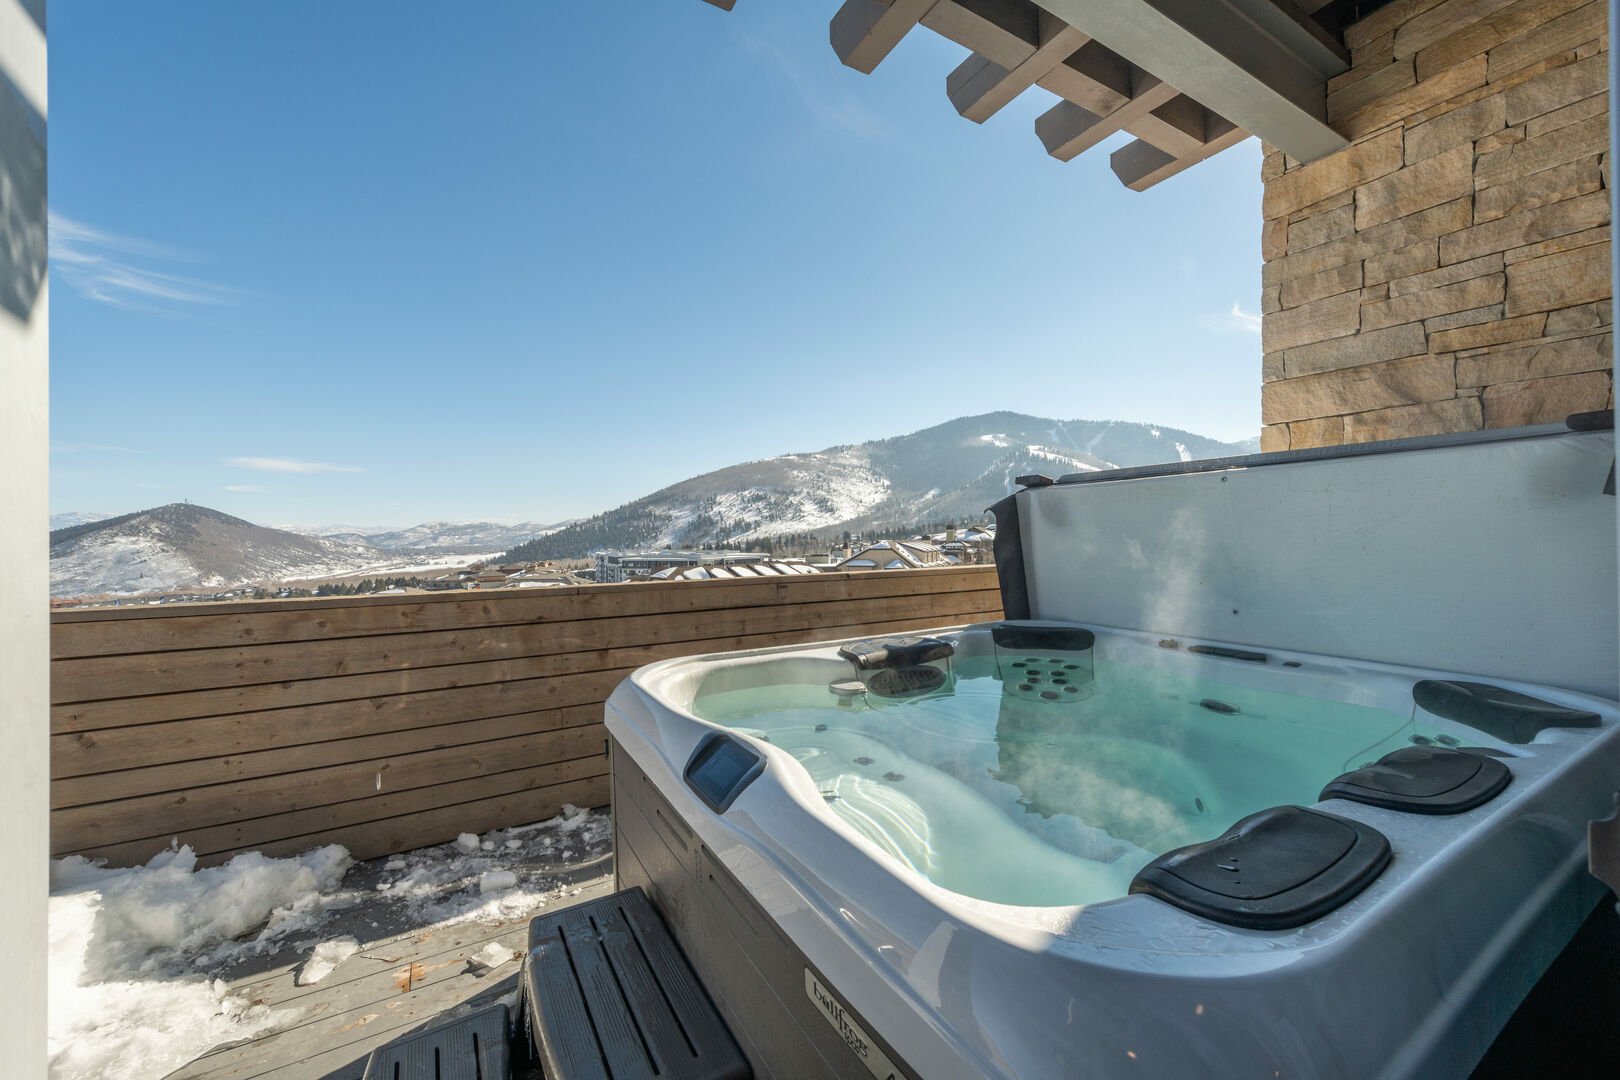 Private hot tub with a beautiful mountain view.